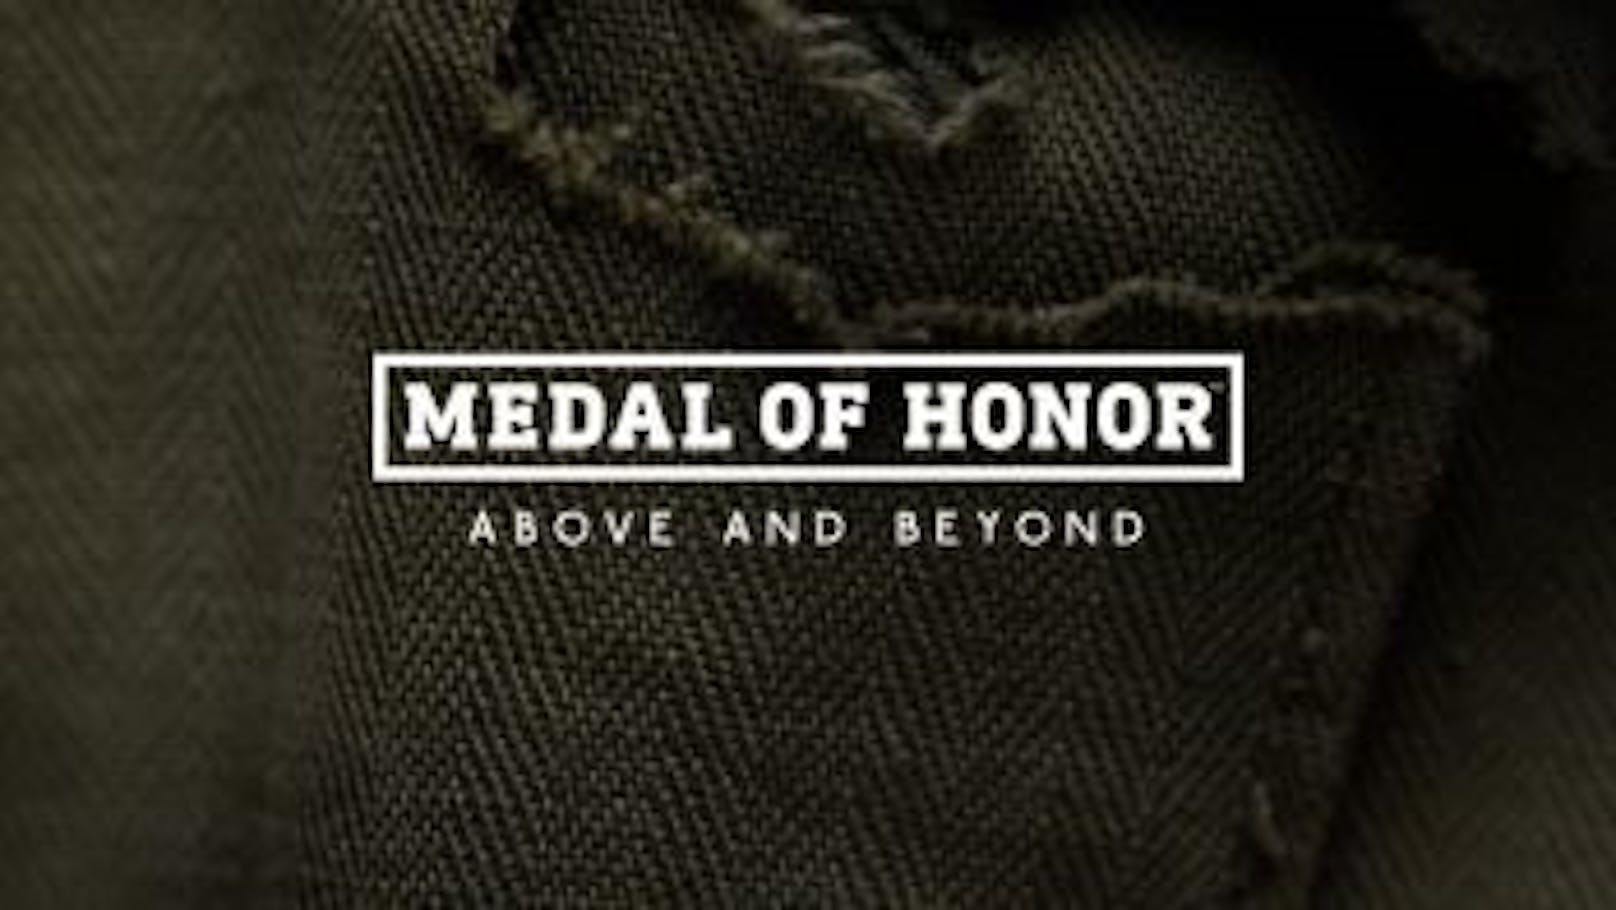 Die Entstehung von "Medal of Honor: Above and Beyond" in nativer VR.